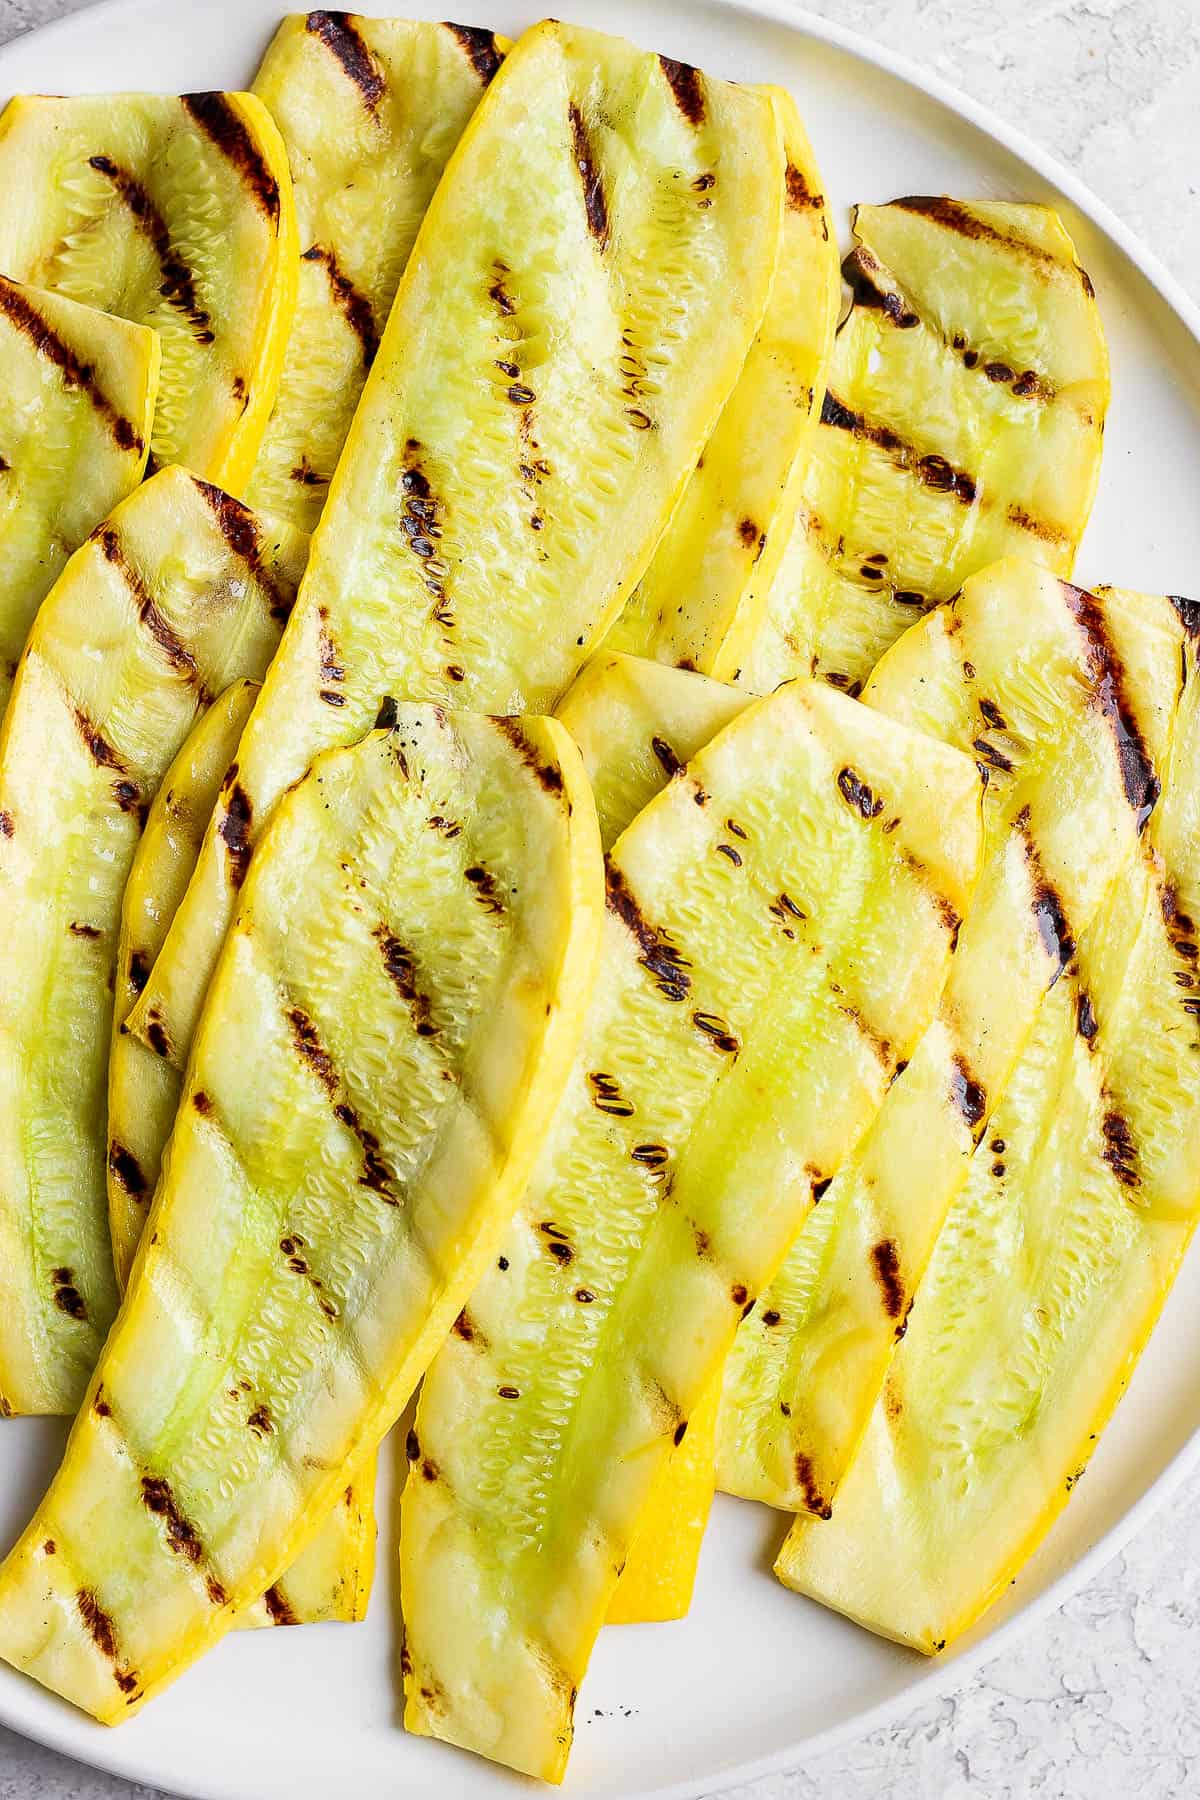 Perfectly grilled yellow squash on a white plate.